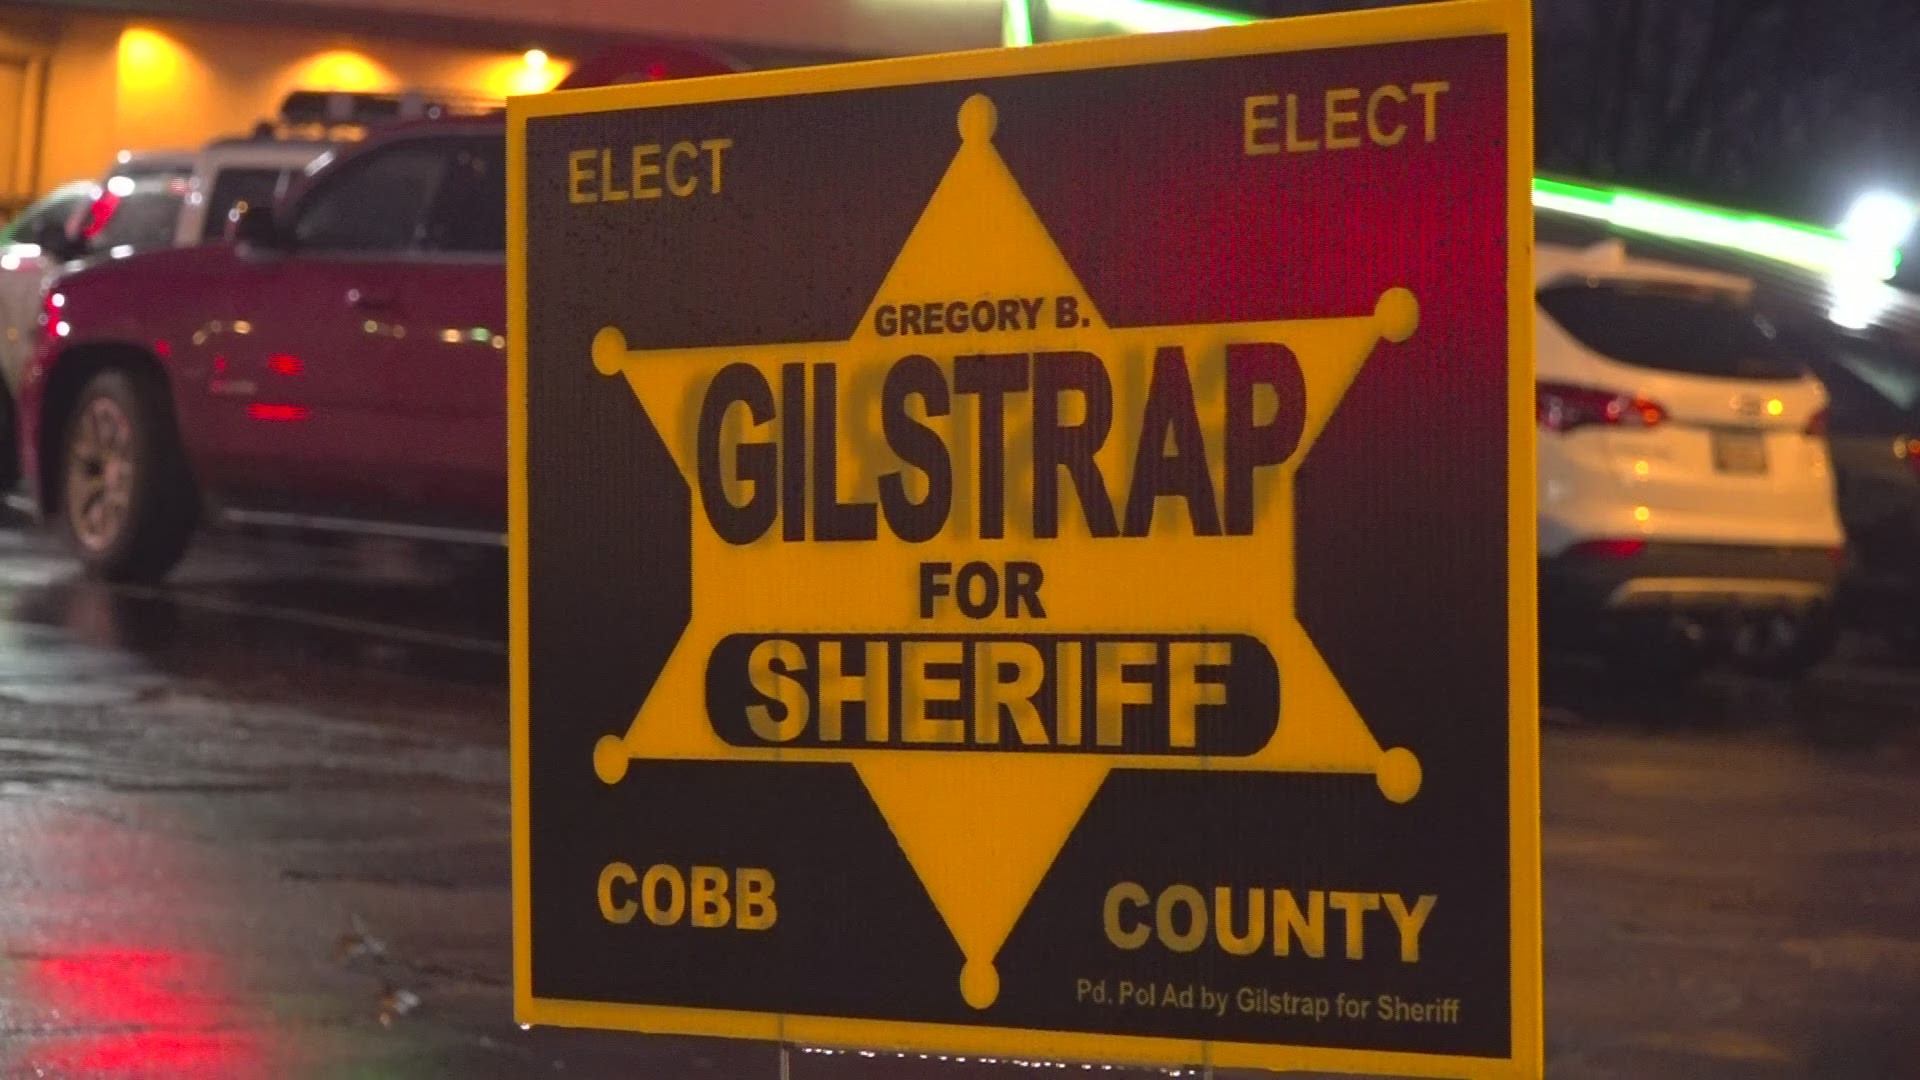 Gilstrap campaigns for Cobb Co. Sheriff for 5th time
The race for sheriff in Cobb County will look very similar to previous years, with the regular players going hea